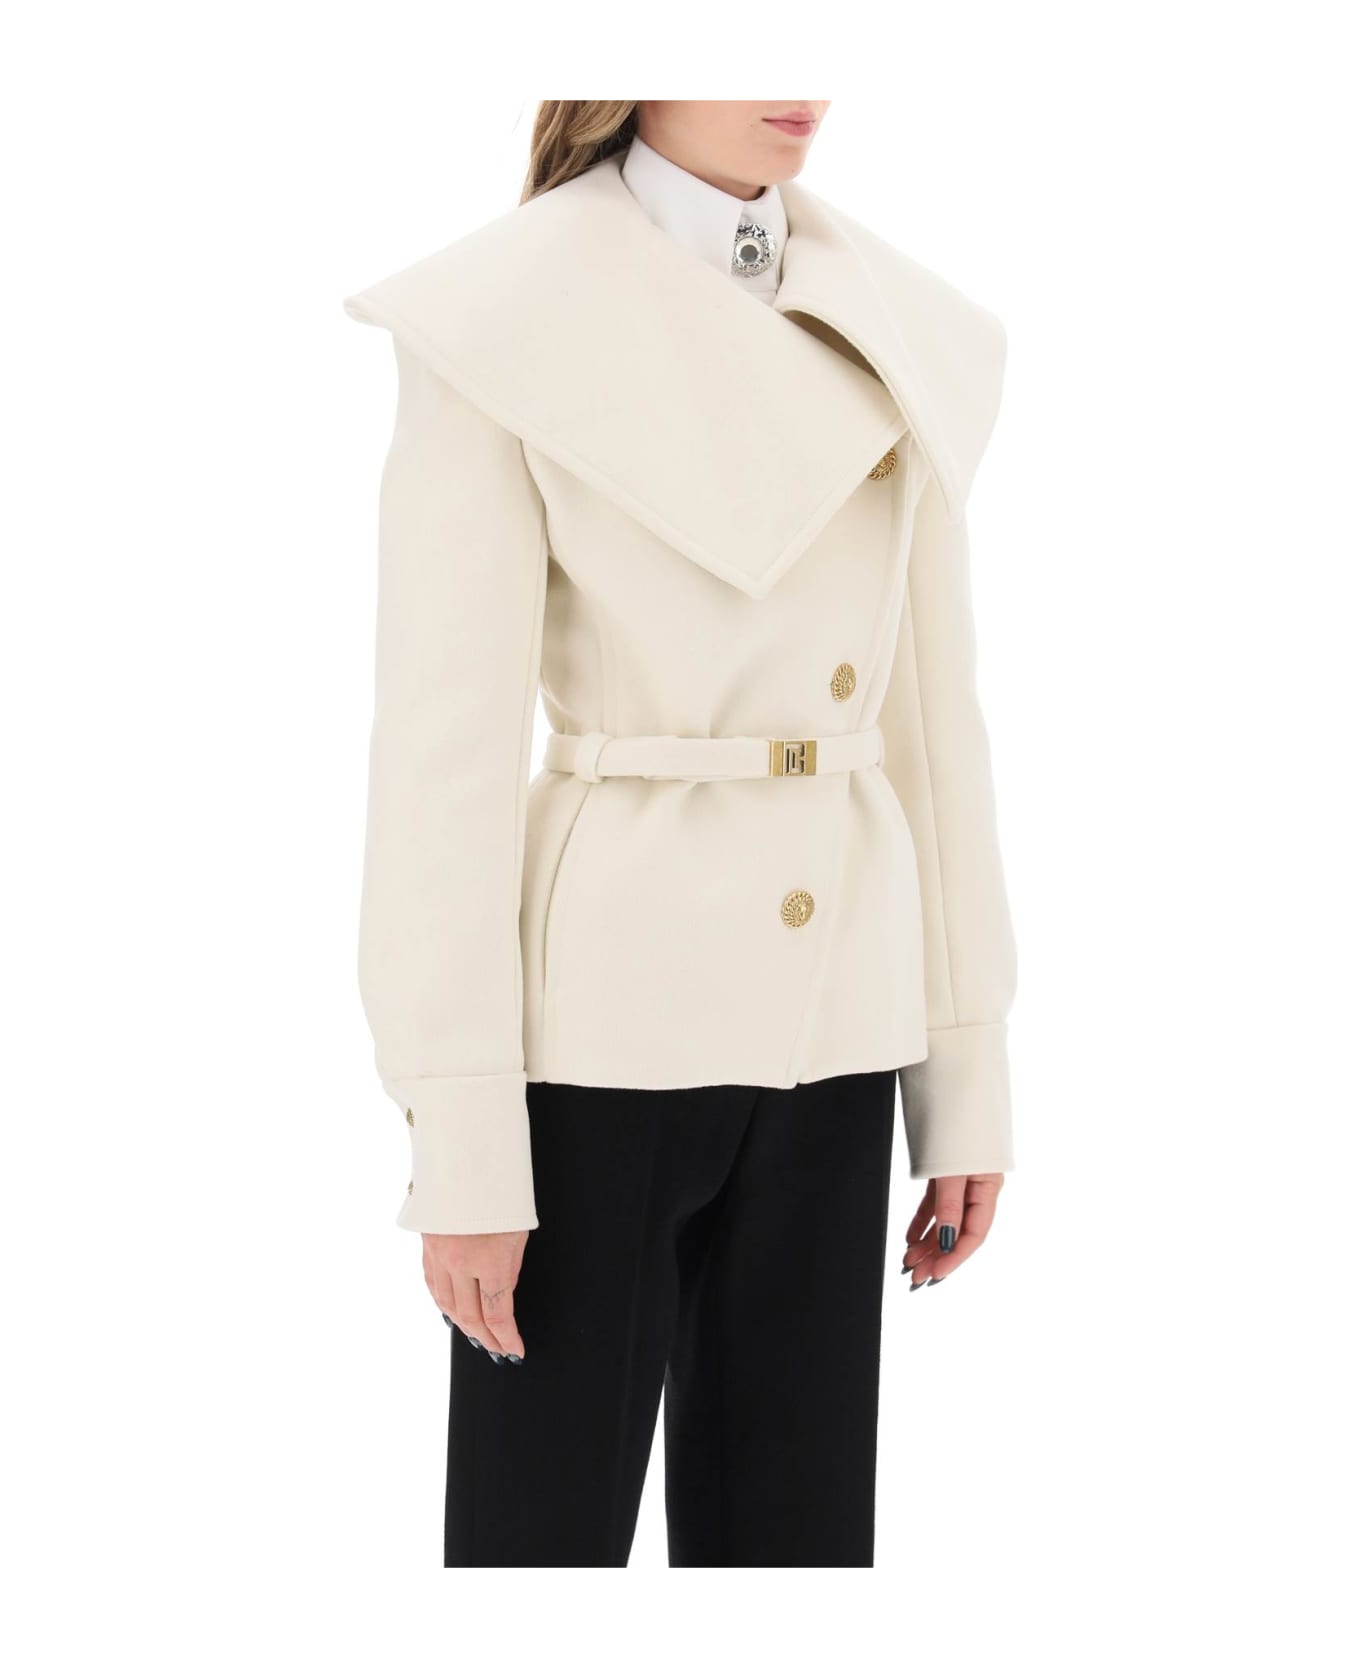 Balmain Belted Double-breasted Peacoat - BLANC (White)